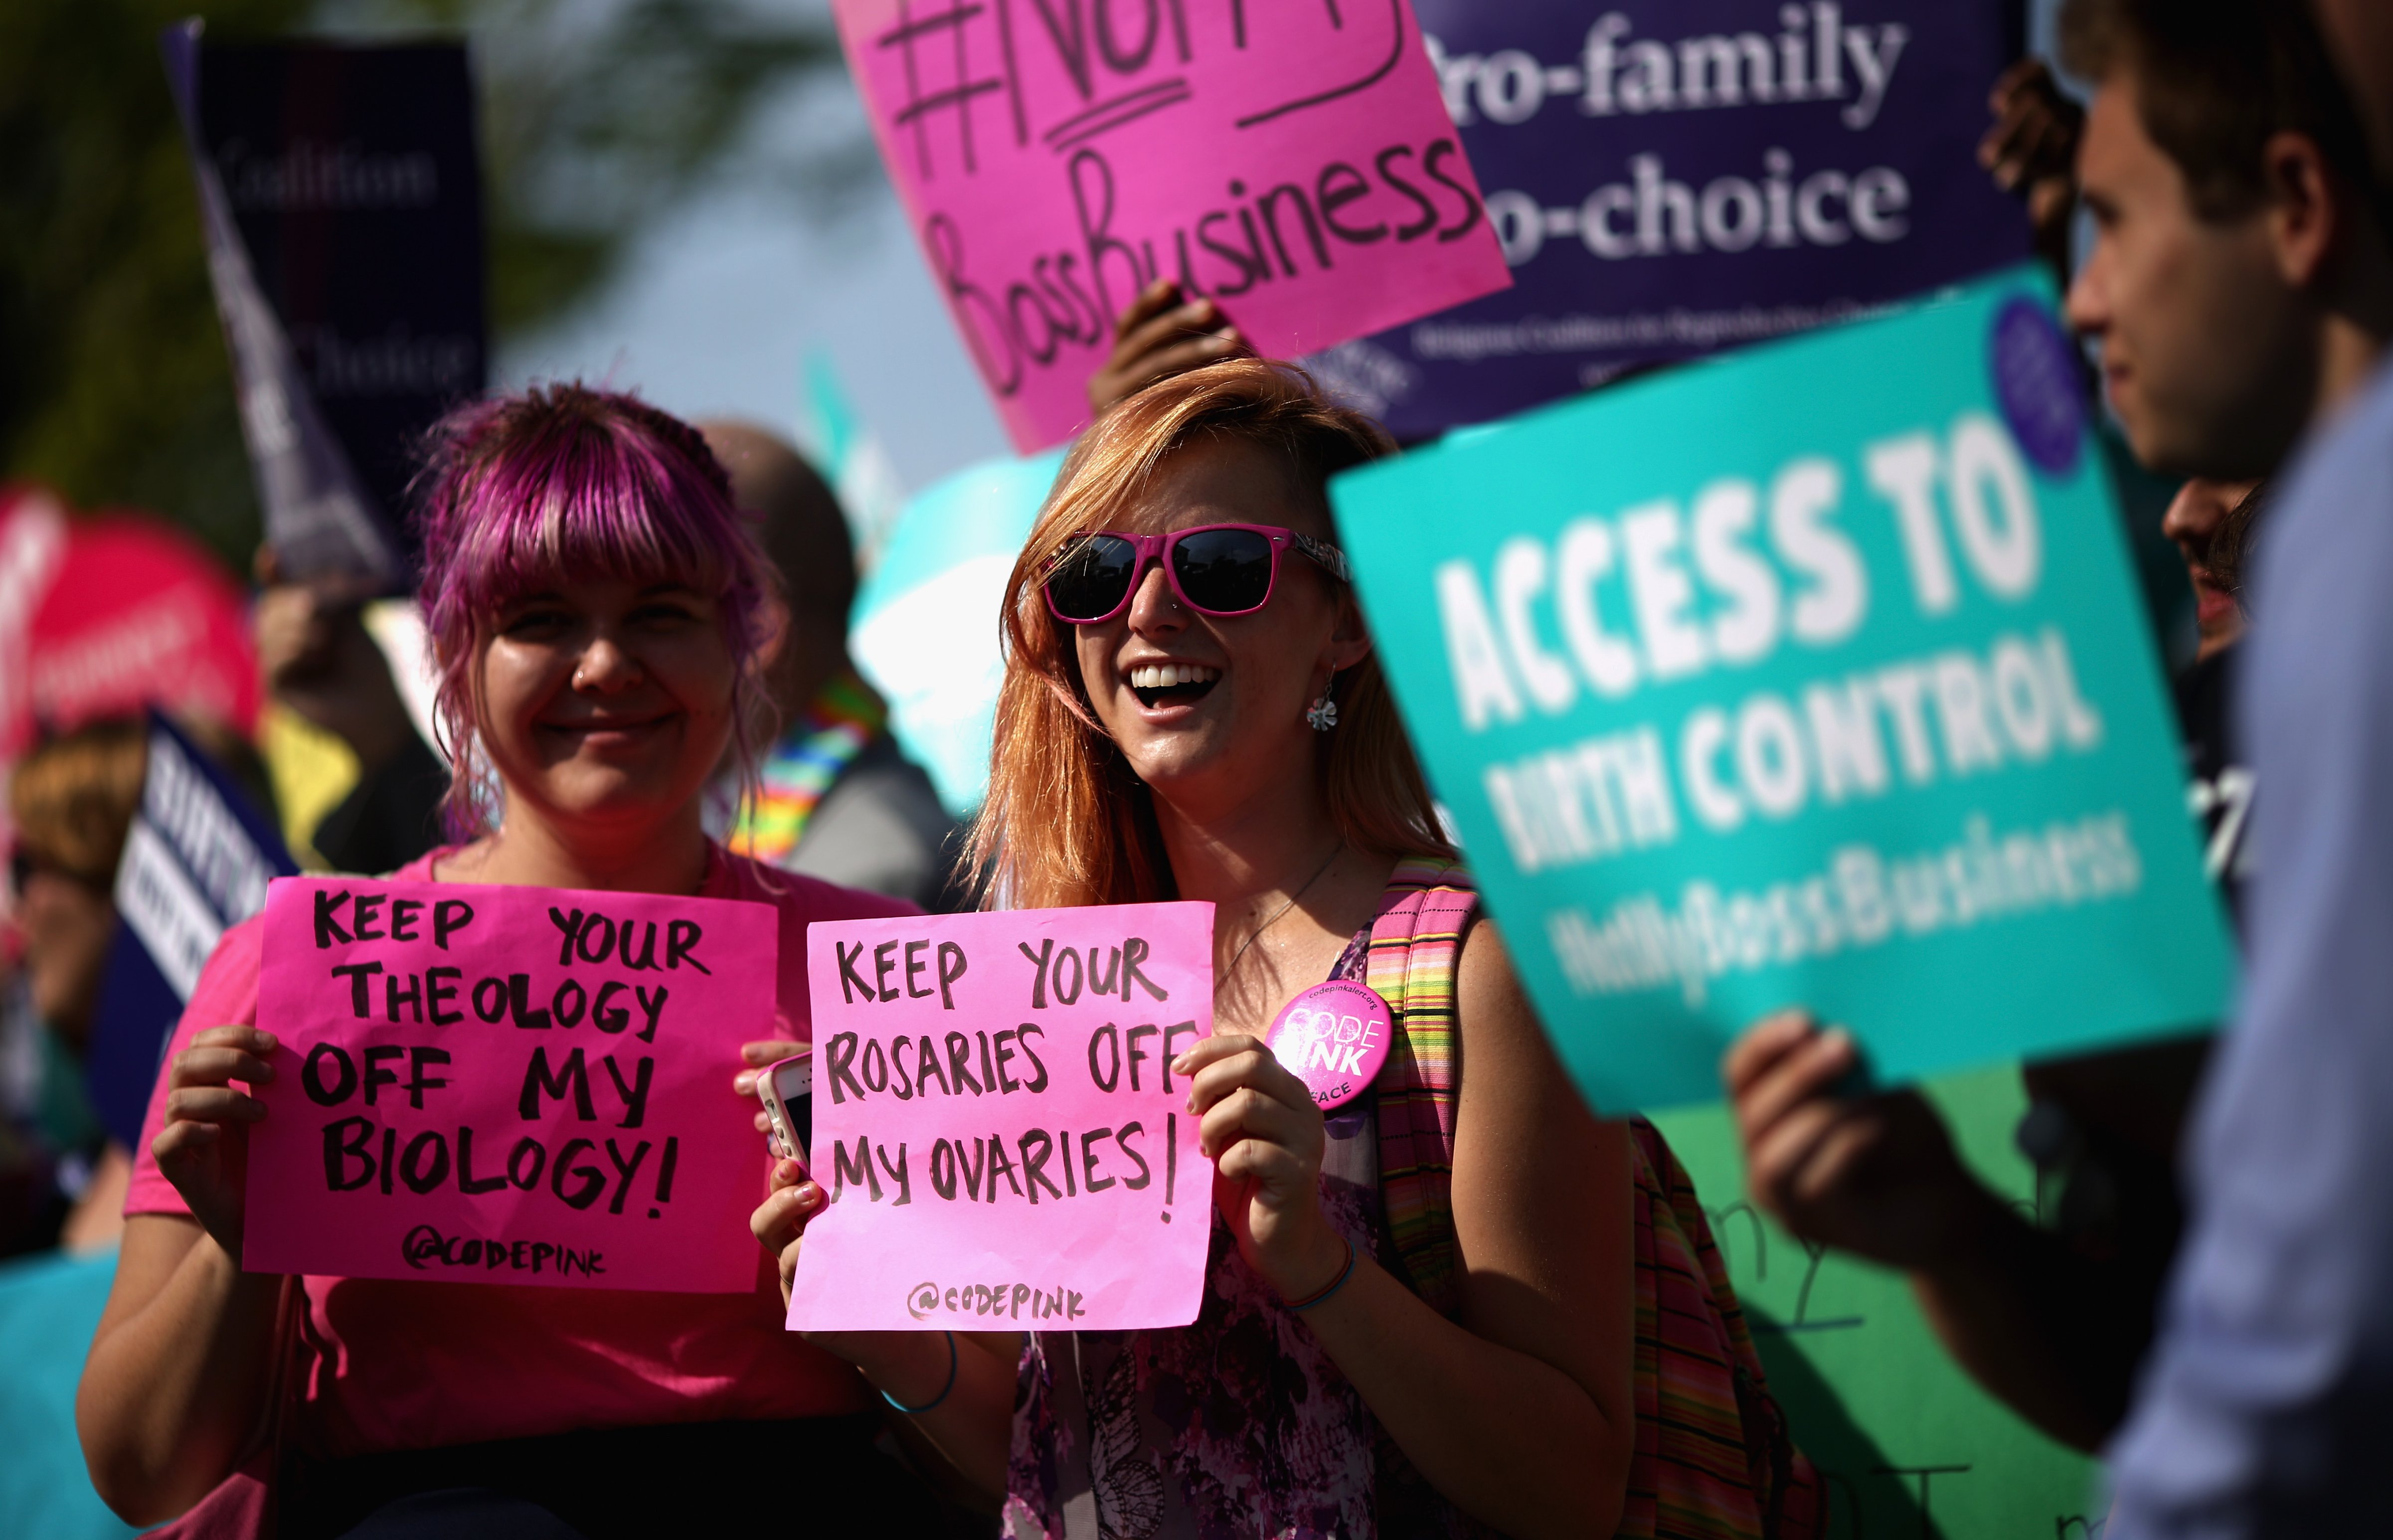 Supreme Court Issues Rulings, Including Hobby Lobby ACA Contraception Mandate Case